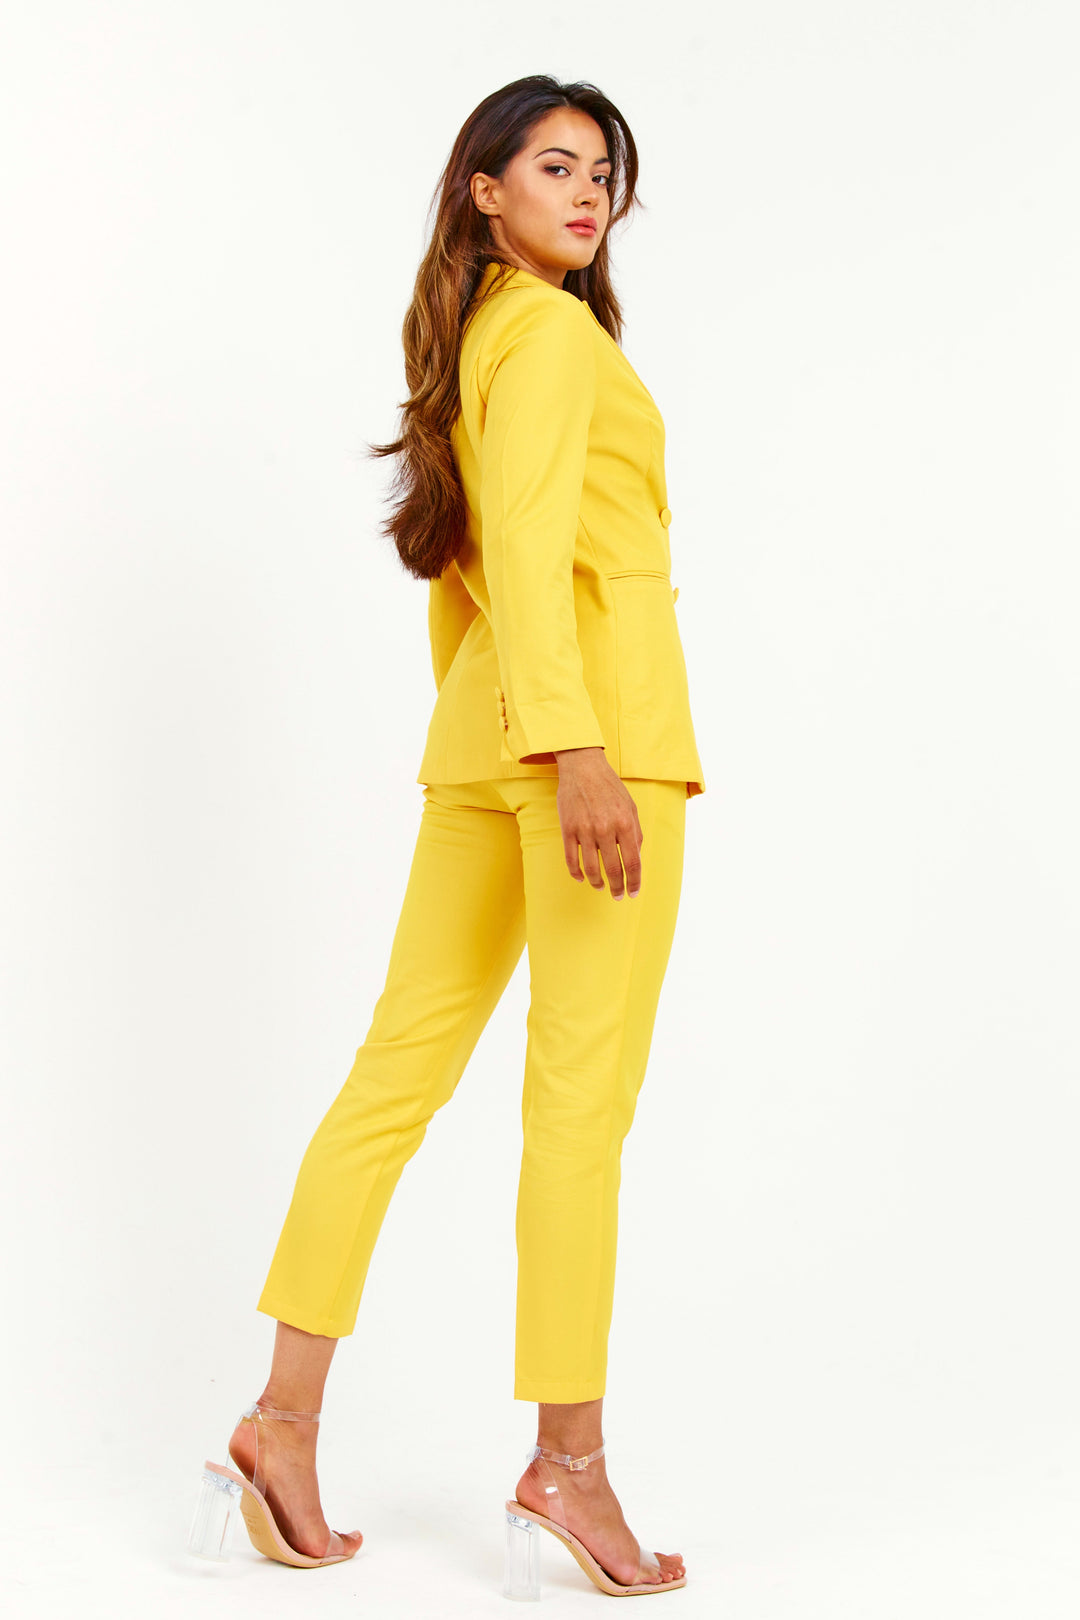 Sunrise Yellow Double Breasted 2 Piece Suit - Standing Back View